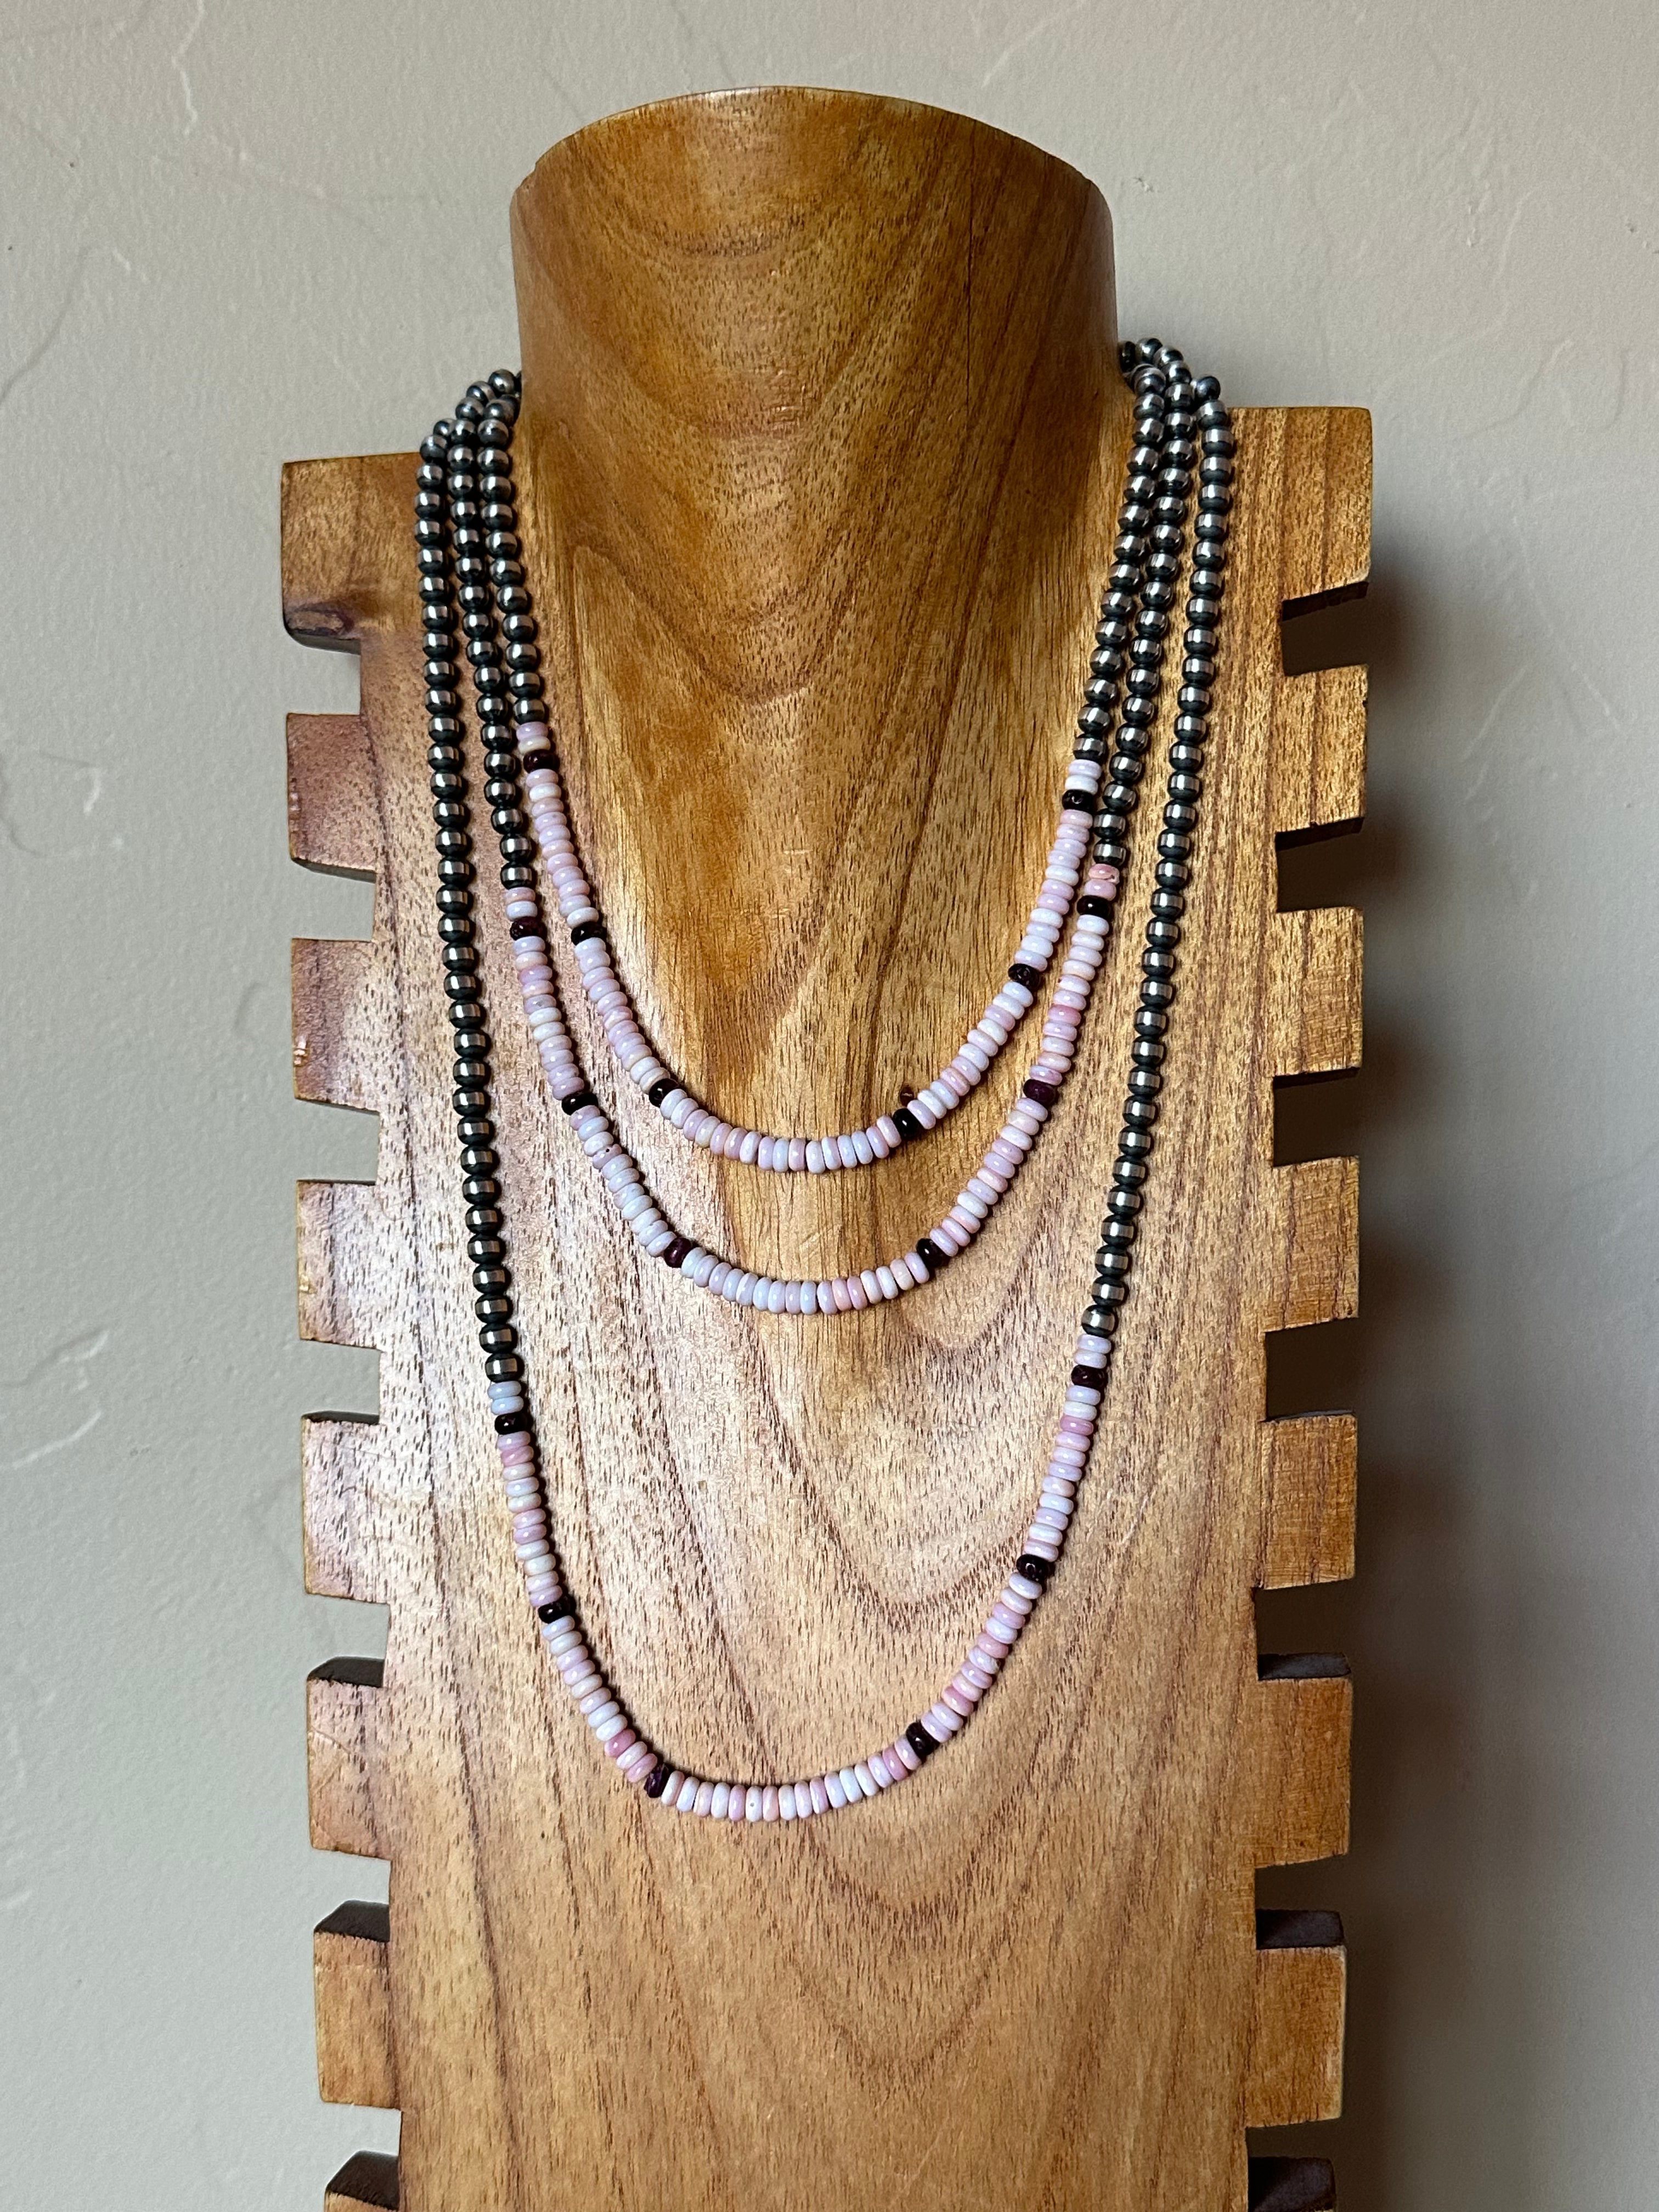 Navajo Strung Multi Stone & Sterling Silver Pearls Beaded Necklace